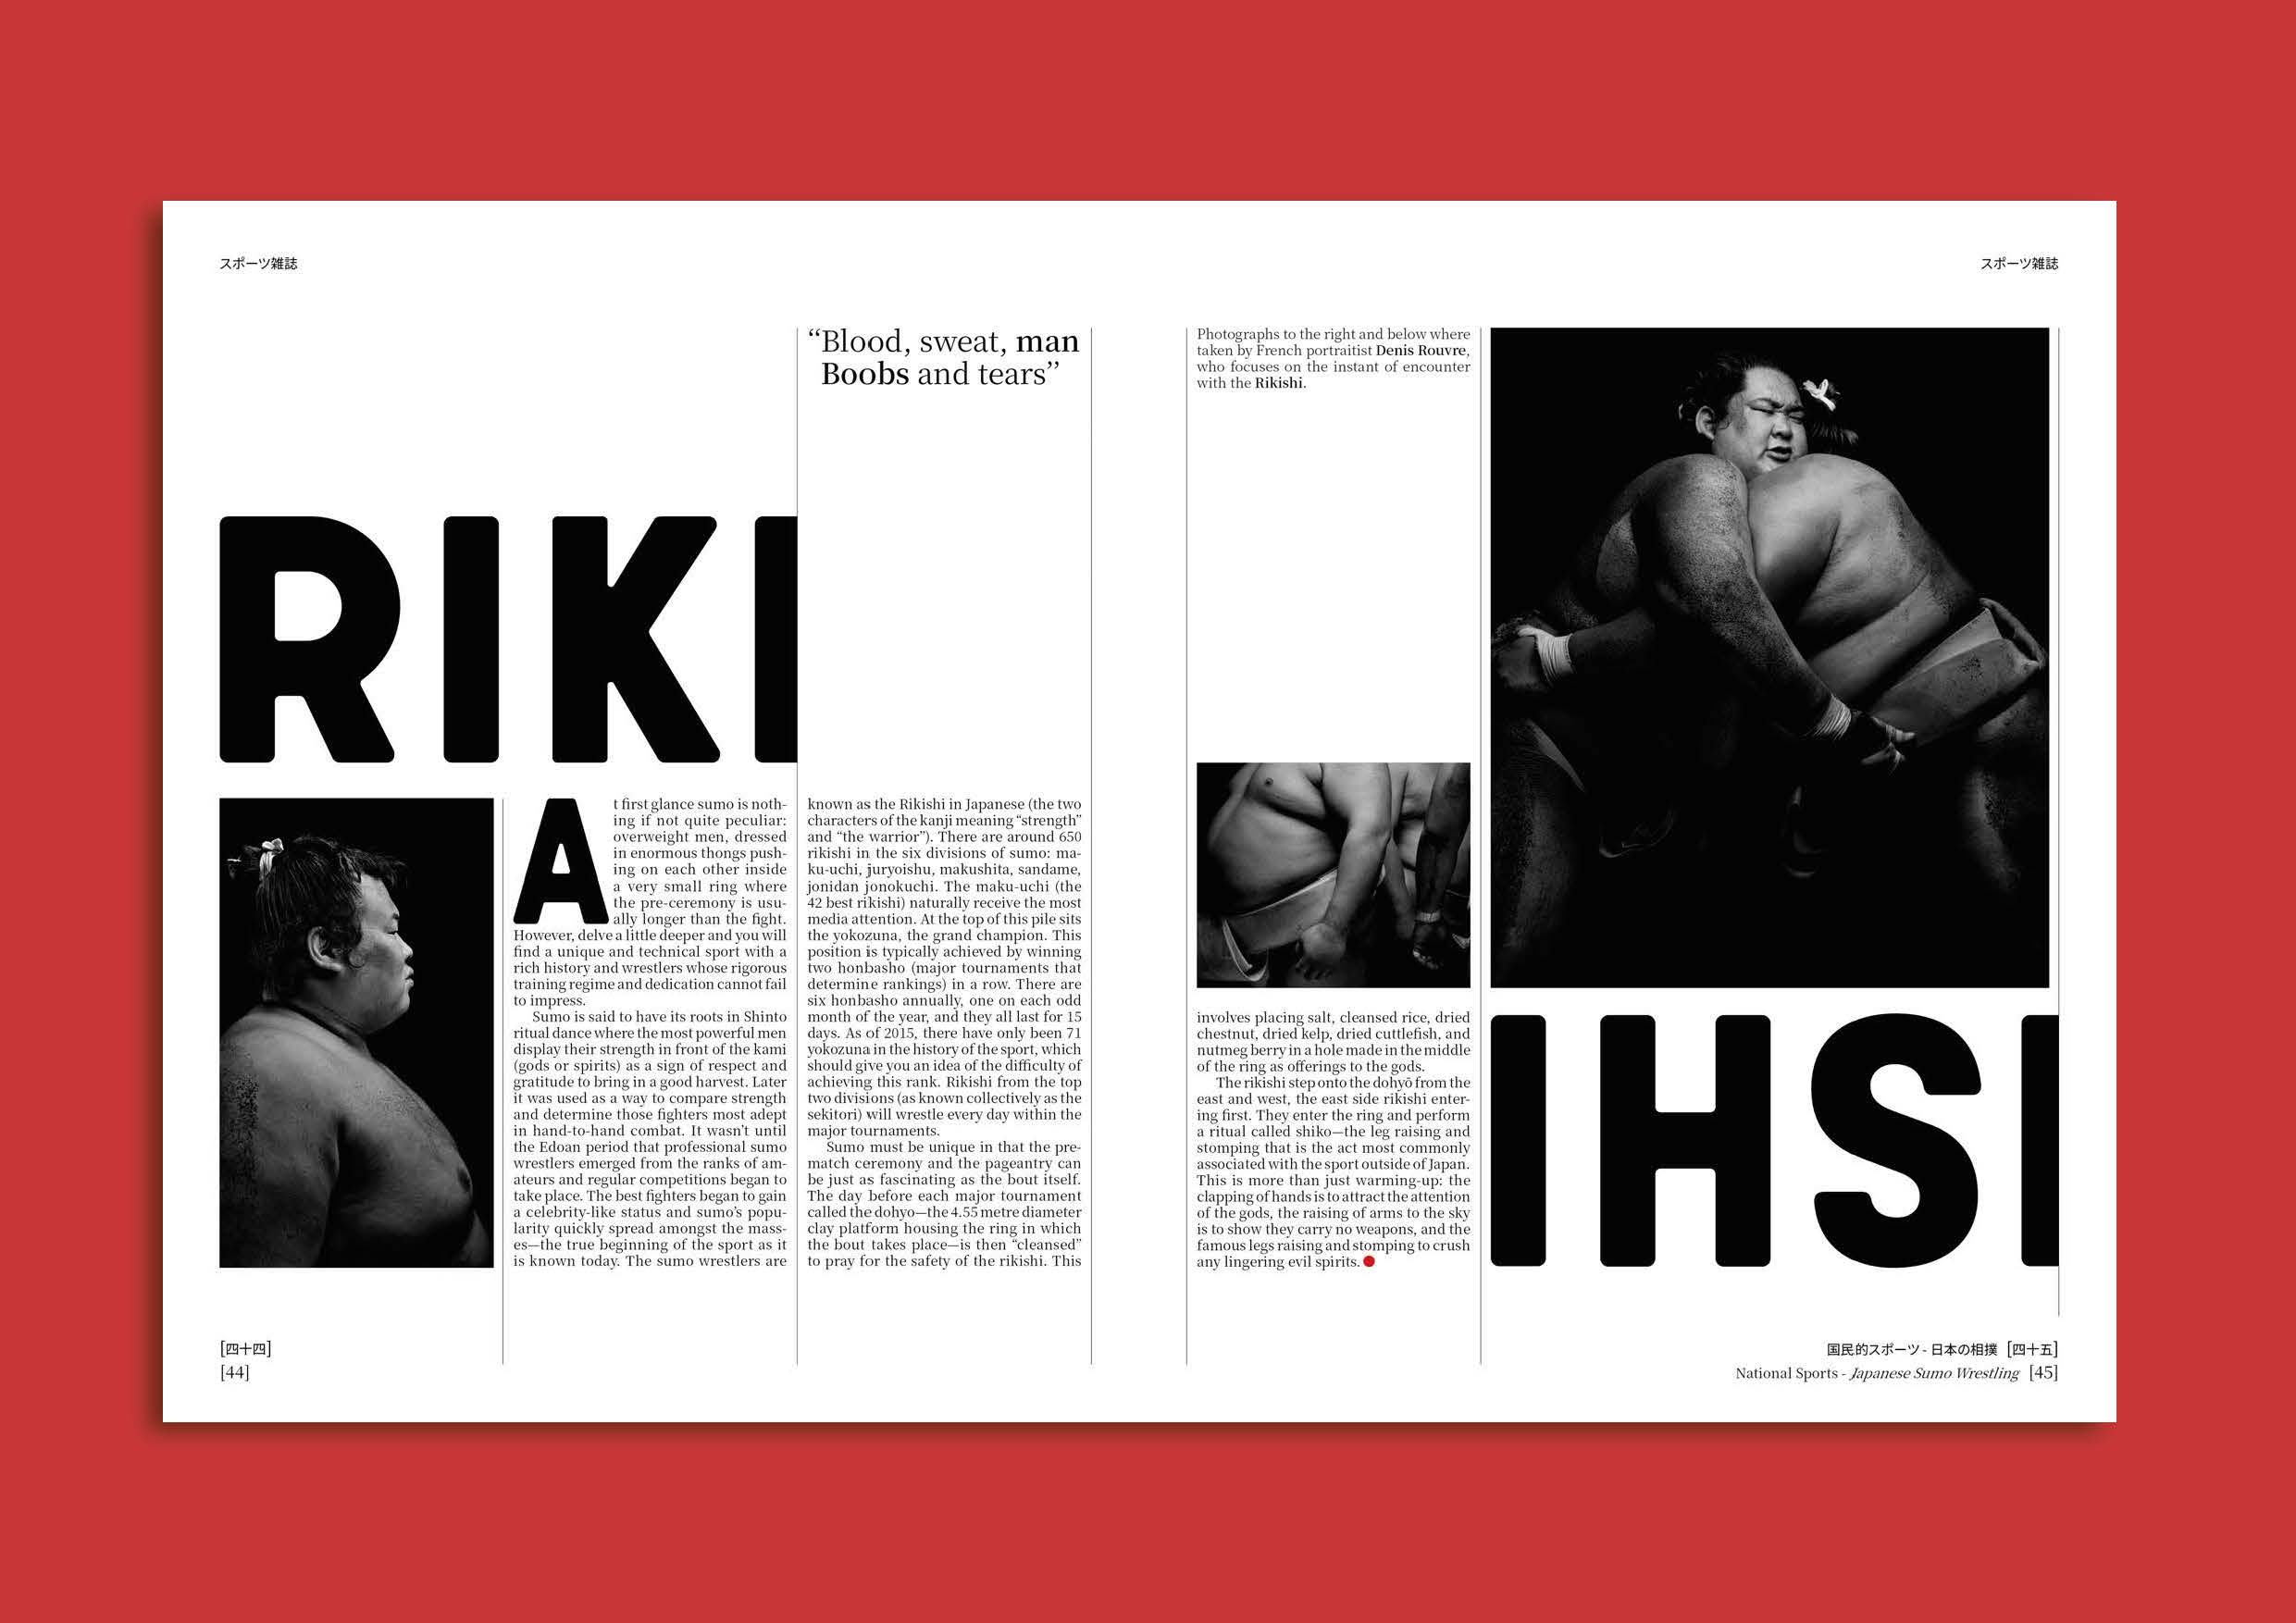 Editorial spread design by Ben Dale showcasing my typesetting skills and use of bold typography.